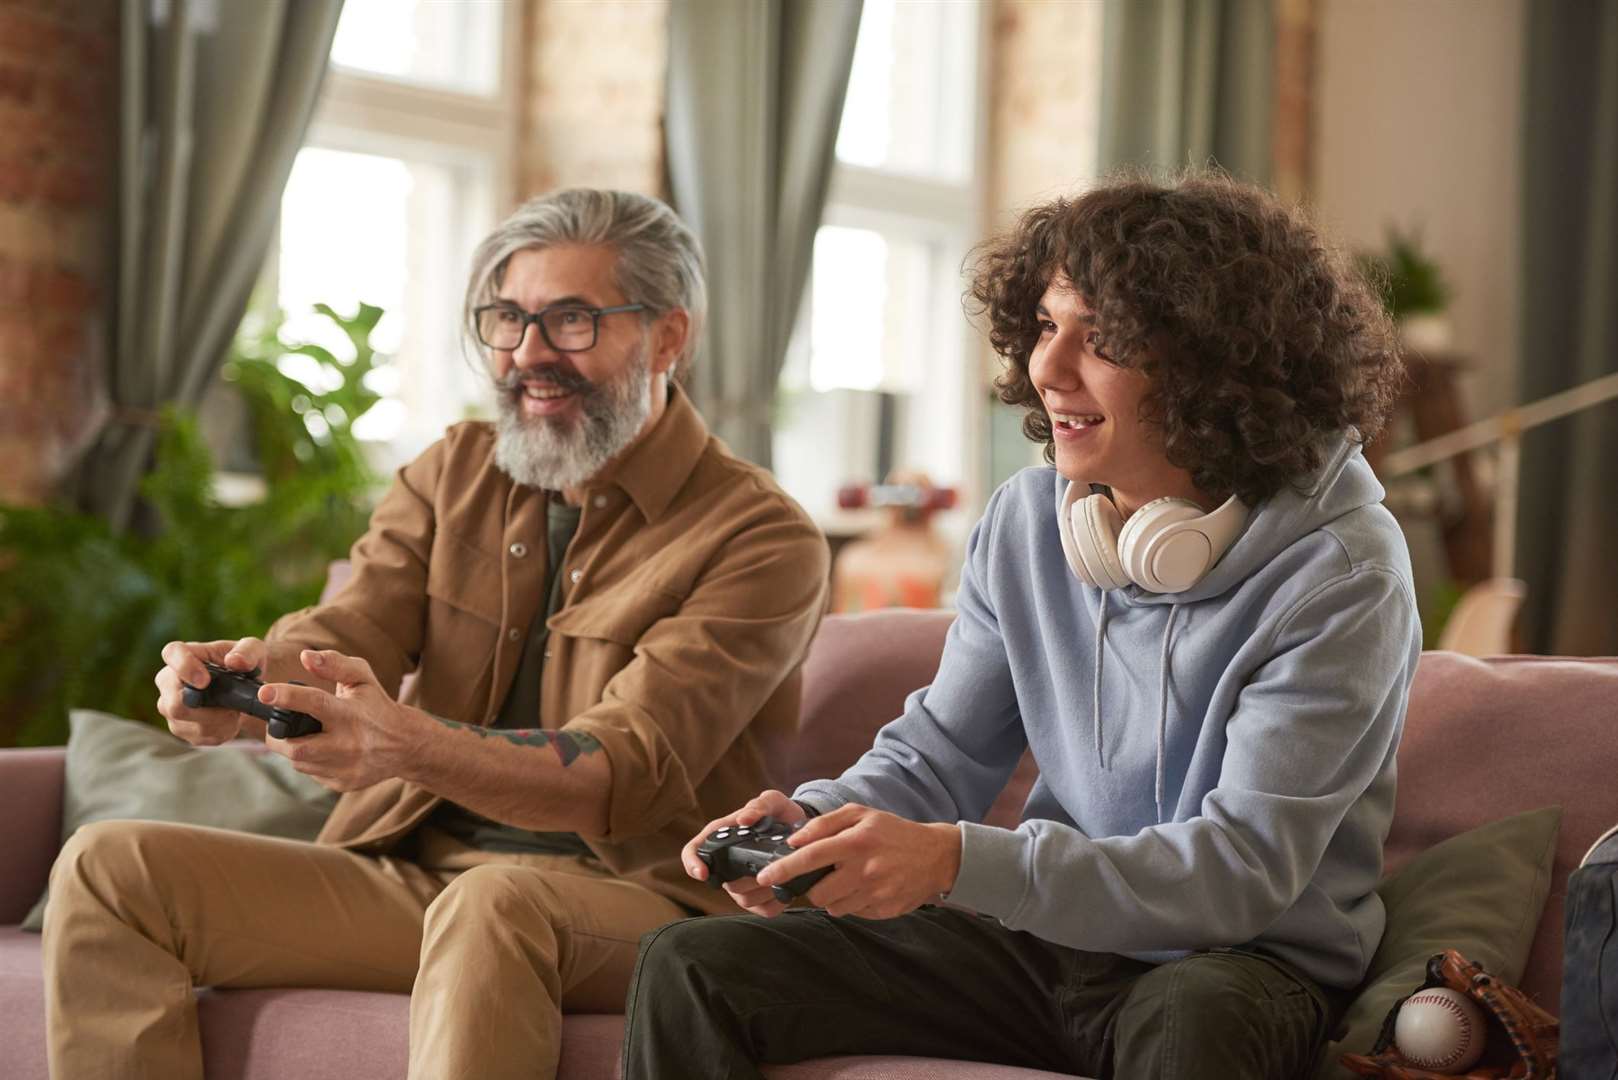 Not only has the professional side of the industry taken off, many casual gamers have also been enjoying a new console/game. Picture: Getty Images/iStockphoto